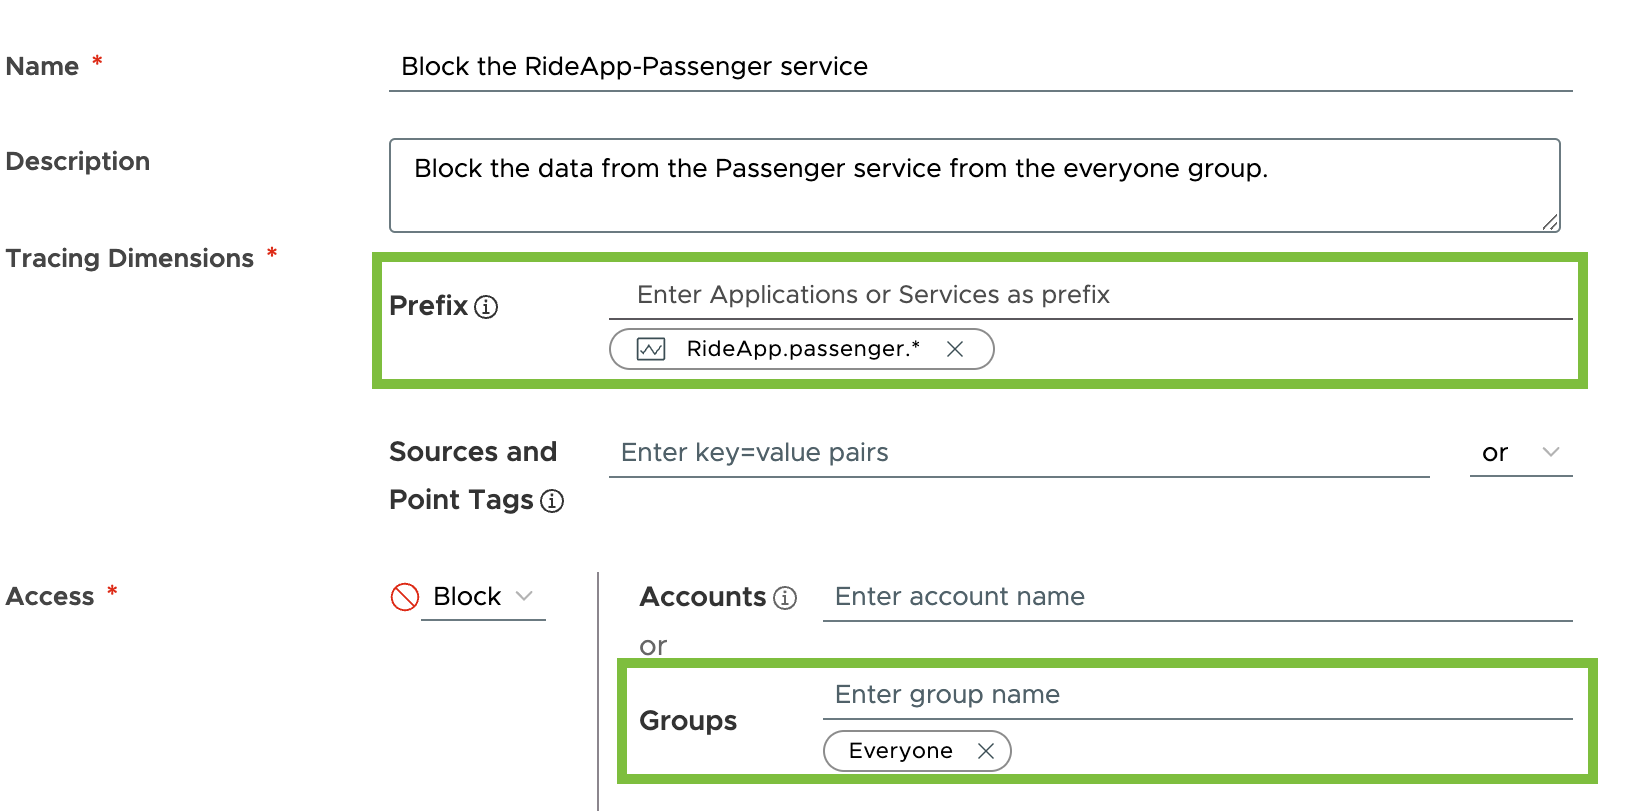 A screenshot of the traces security policy created to block the user group everyone from seeing data of the RiderApp's passenger service.